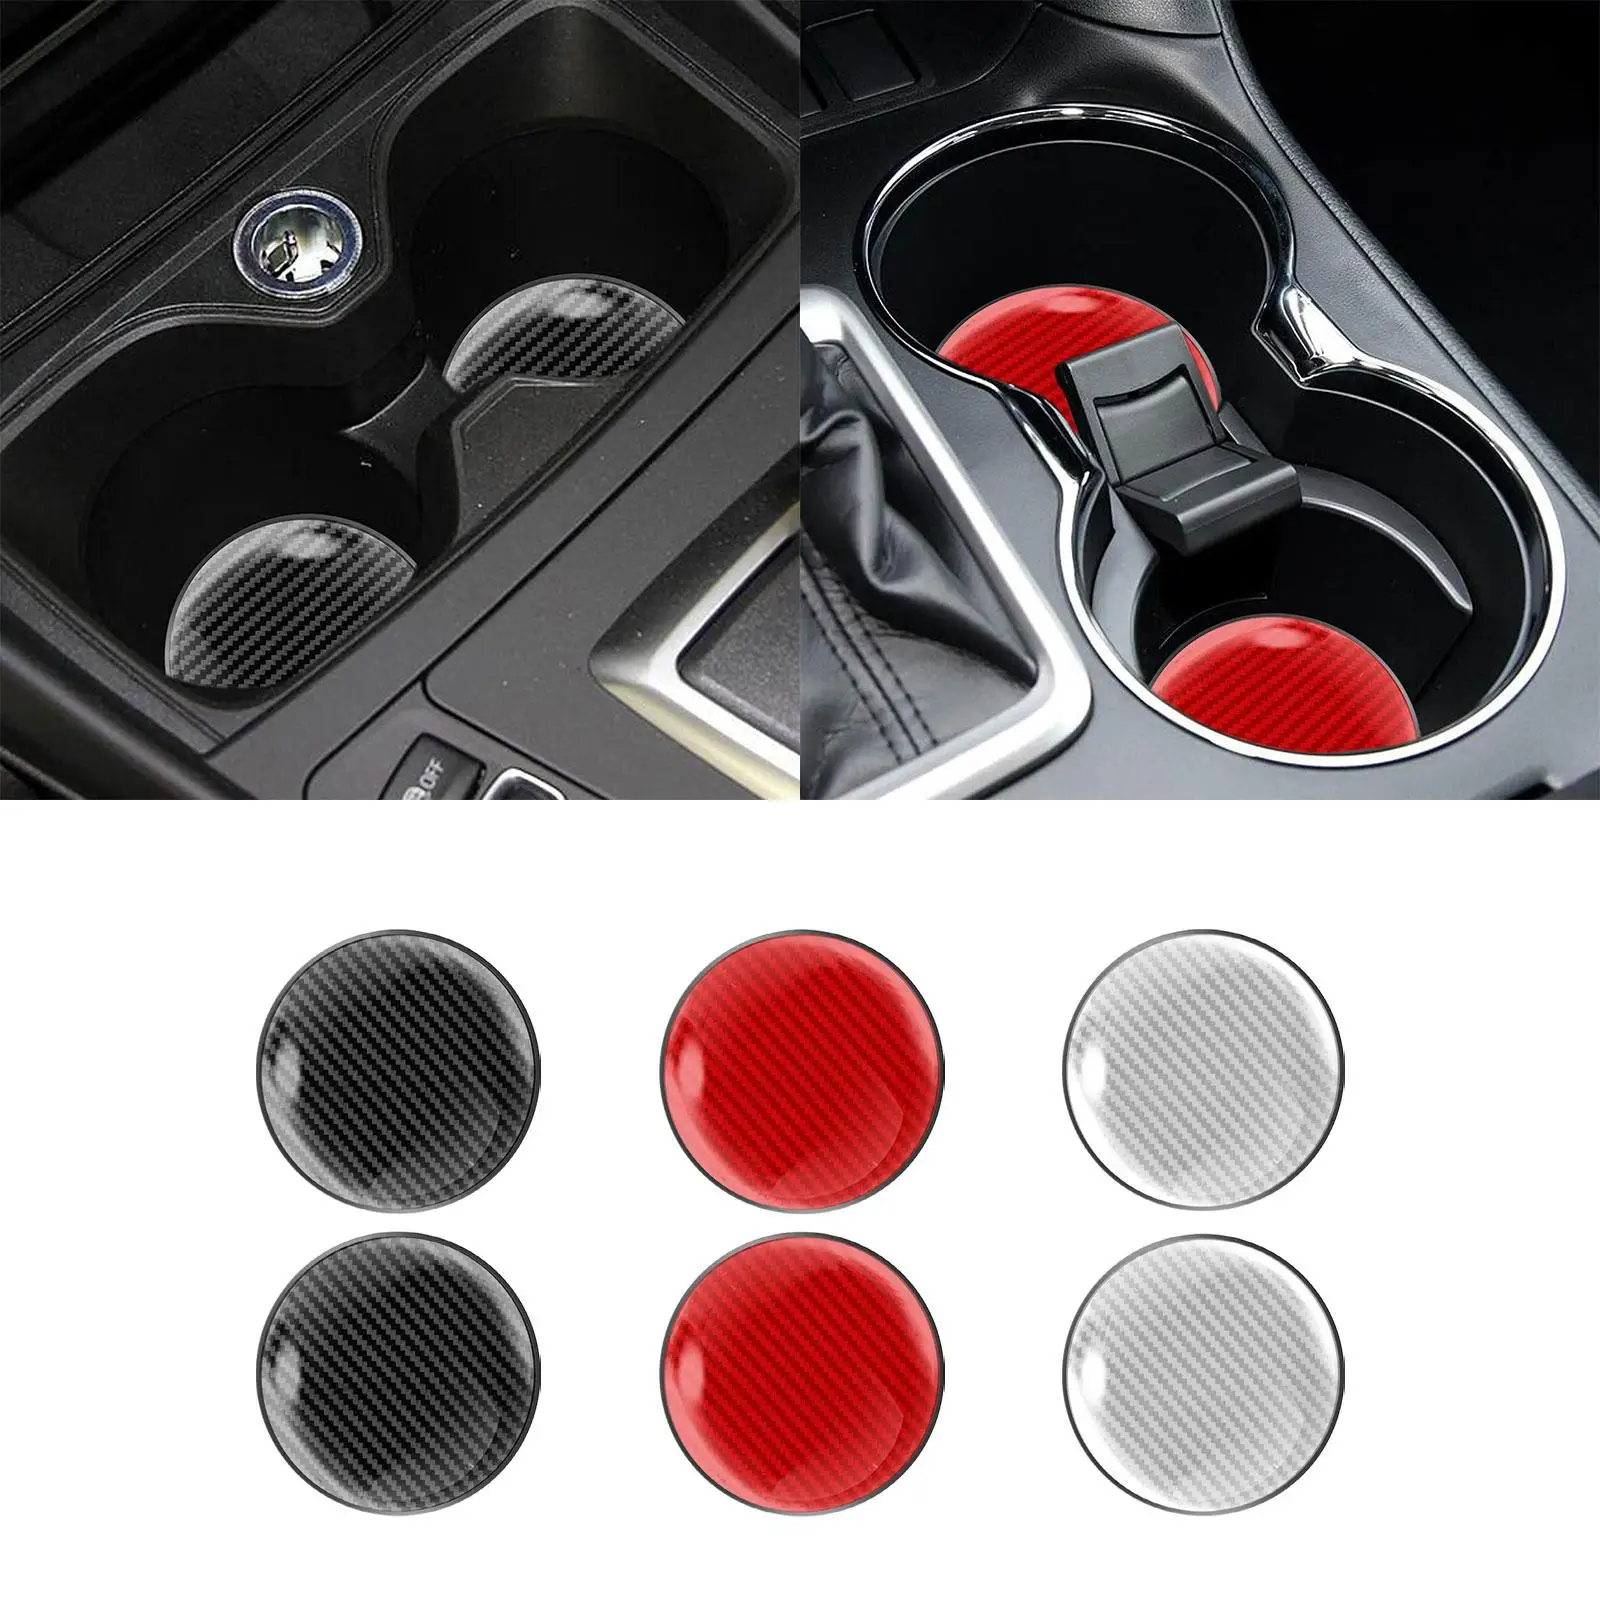 2Pcs Cup Holder Coaster Teacup Protector Car Accessory Drink Mat Vehicle Car Coasters Insert for Travel Outdoor Most Cars